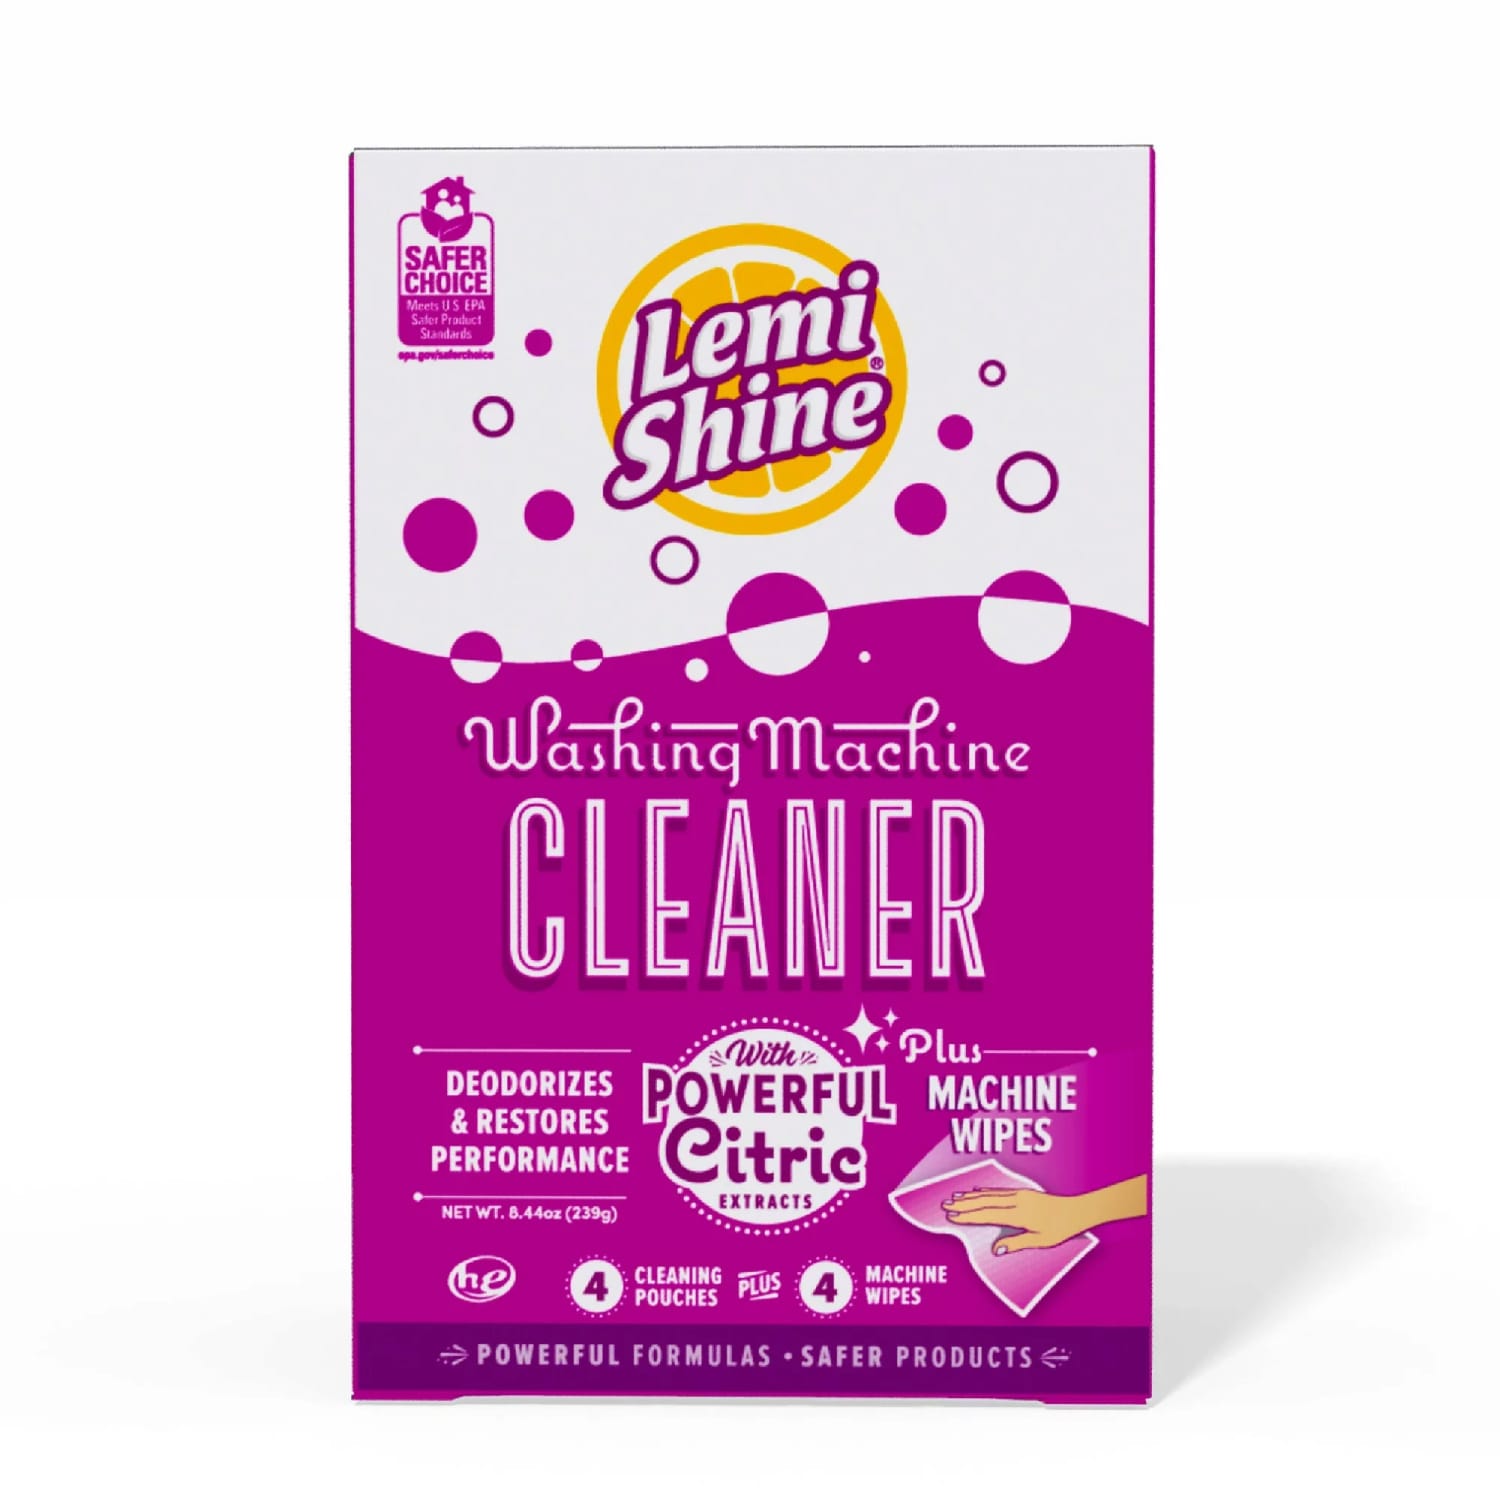 Lemi Shine: Why It's a Safer, Gentler Cleaning Agent Worth the Hype